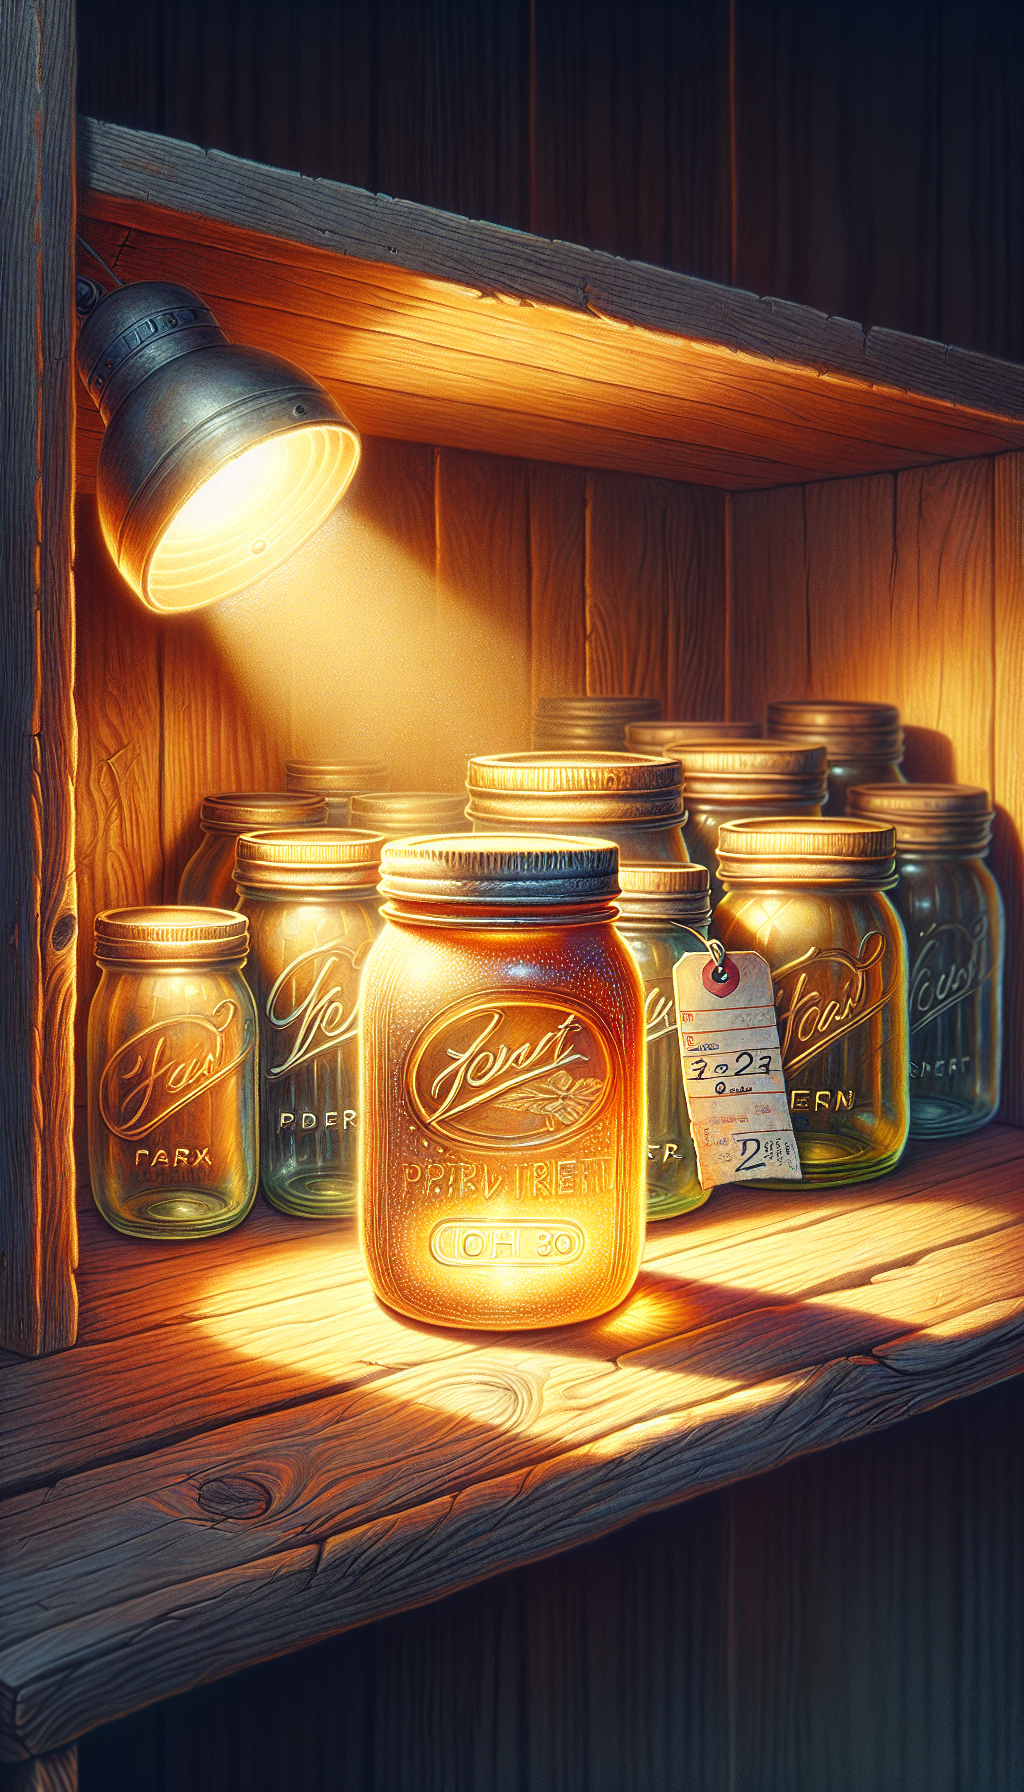 A whimsical still-life illustration depicts a vintage wooden shelf, with a spotlight casting a golden glow on a row of old, colorful mason jars. Among them, a jar with a shimmering, translucent lid stands out, subtly embossed with the rarest maker's mark, while a faded price tag reveals an astonishing value, hinting at the hidden treasures of antique collectors.